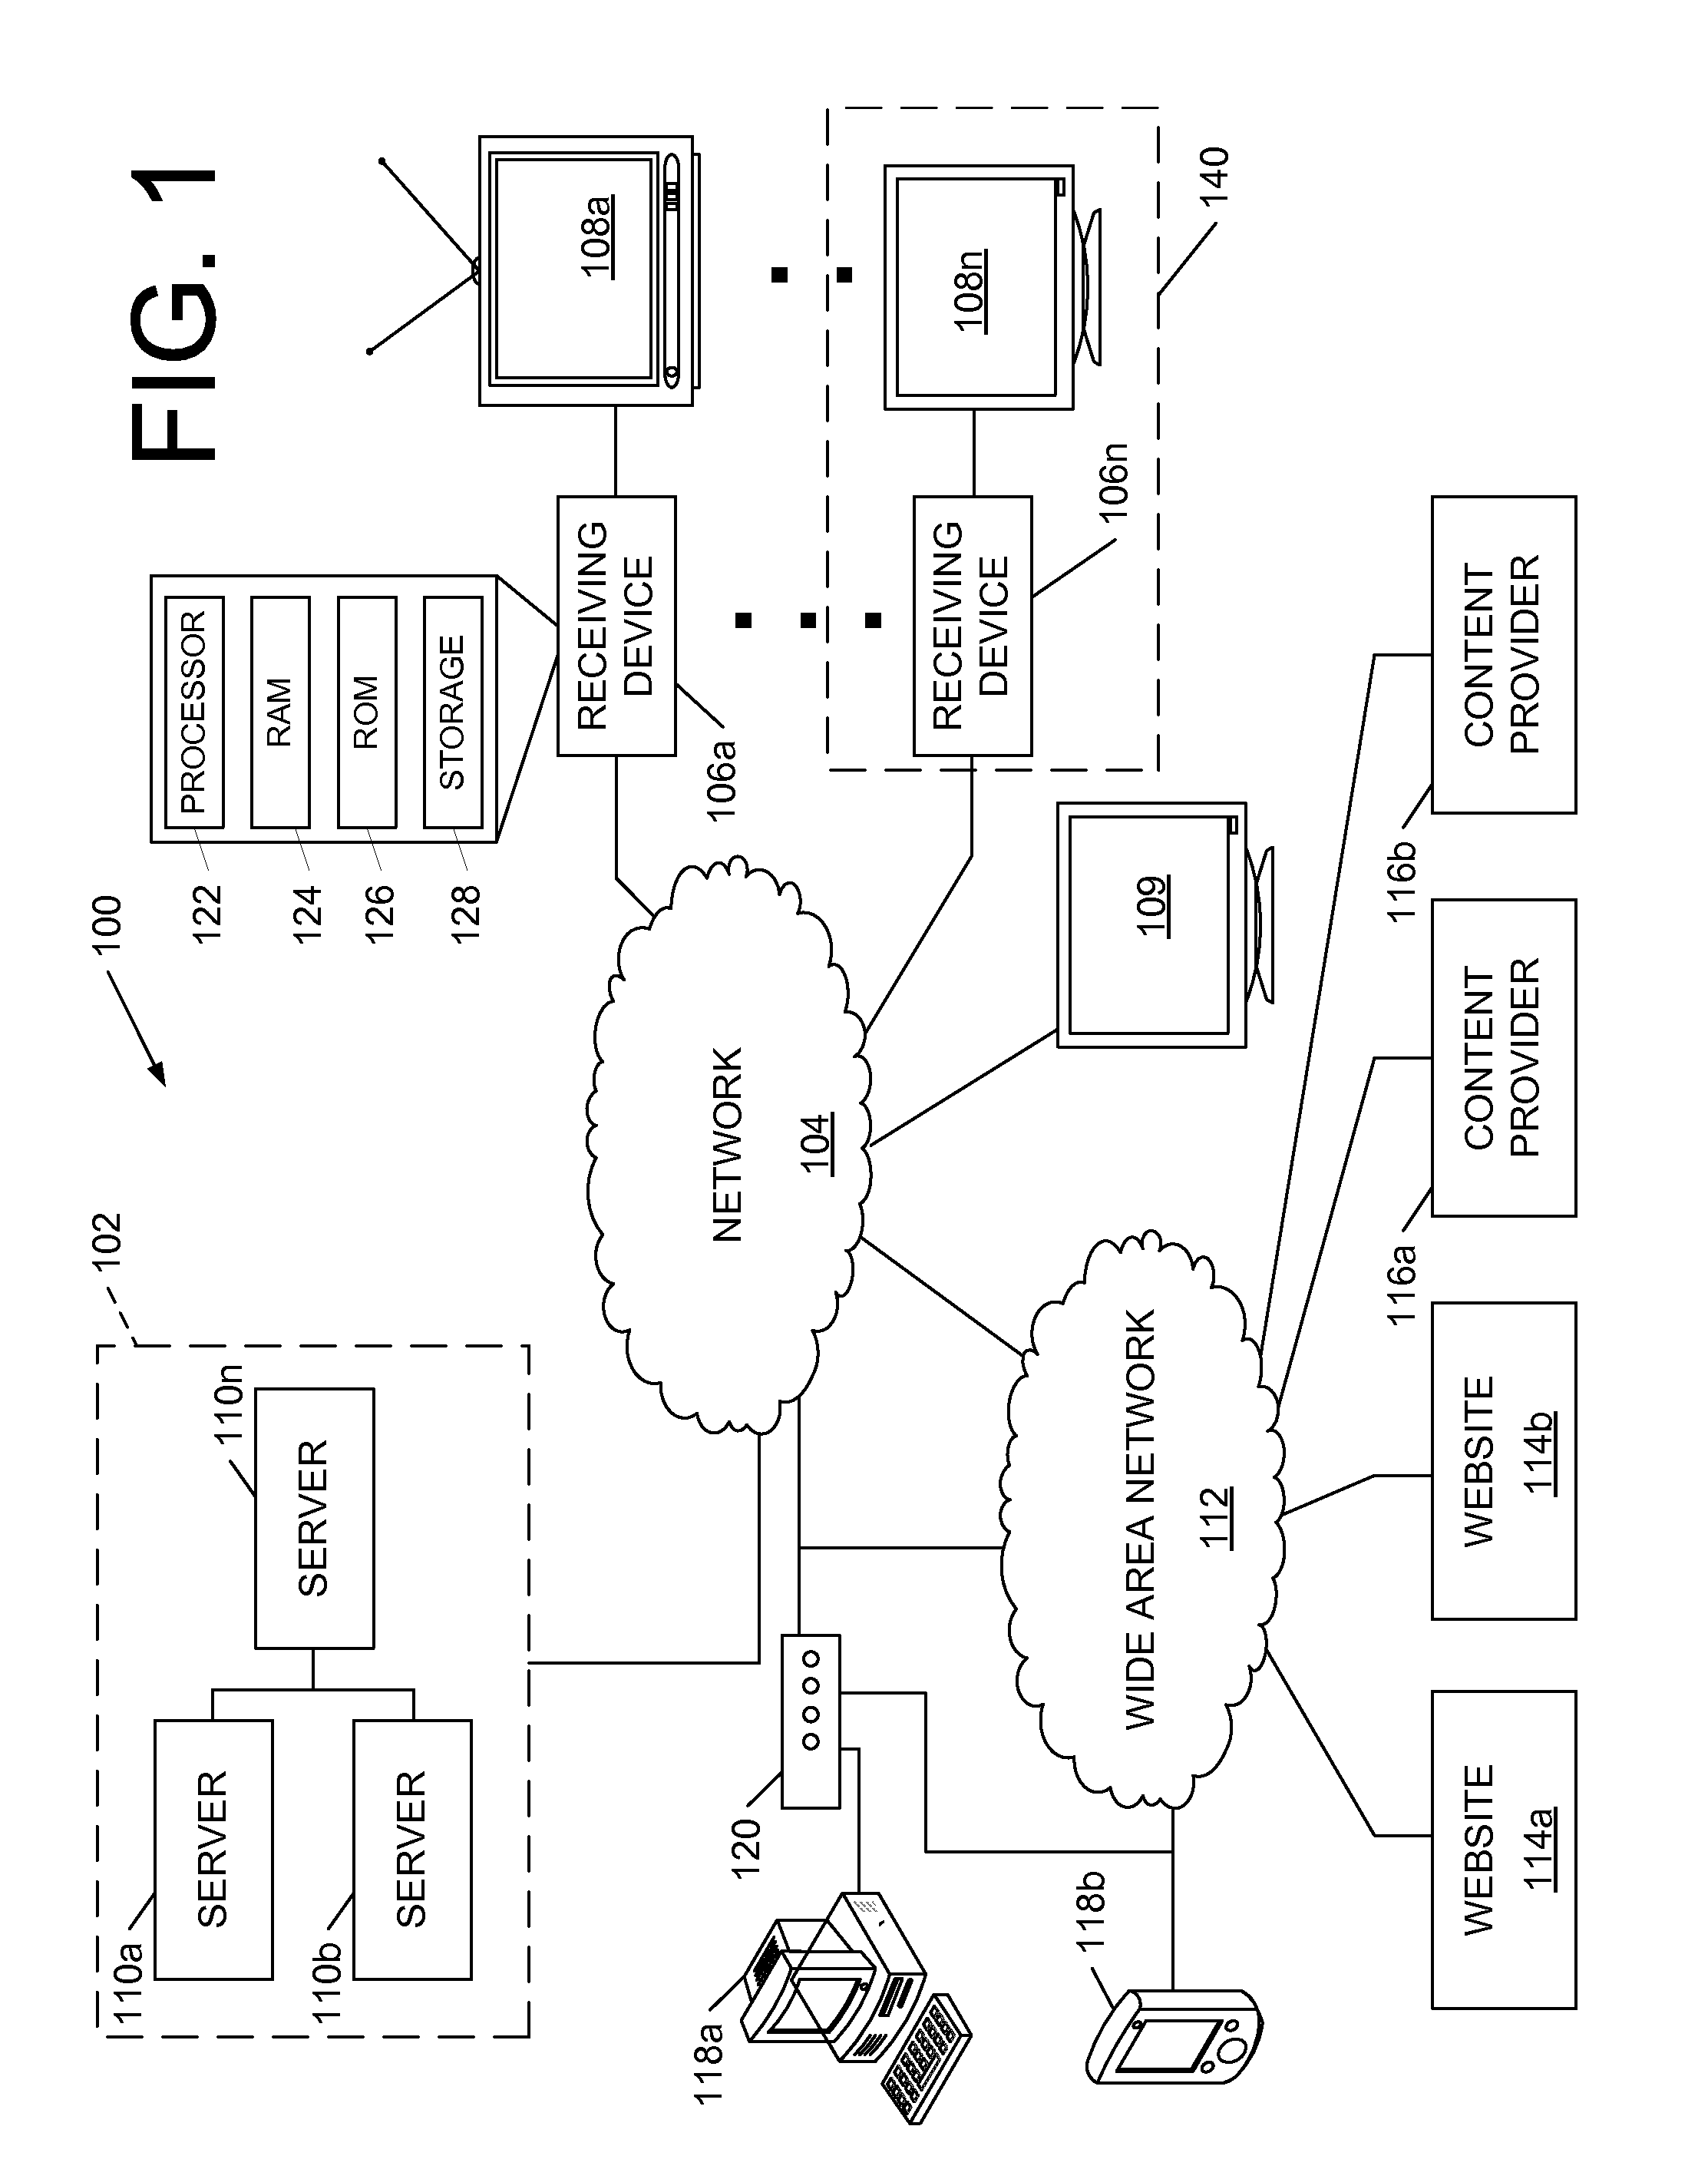 Application support for network devices